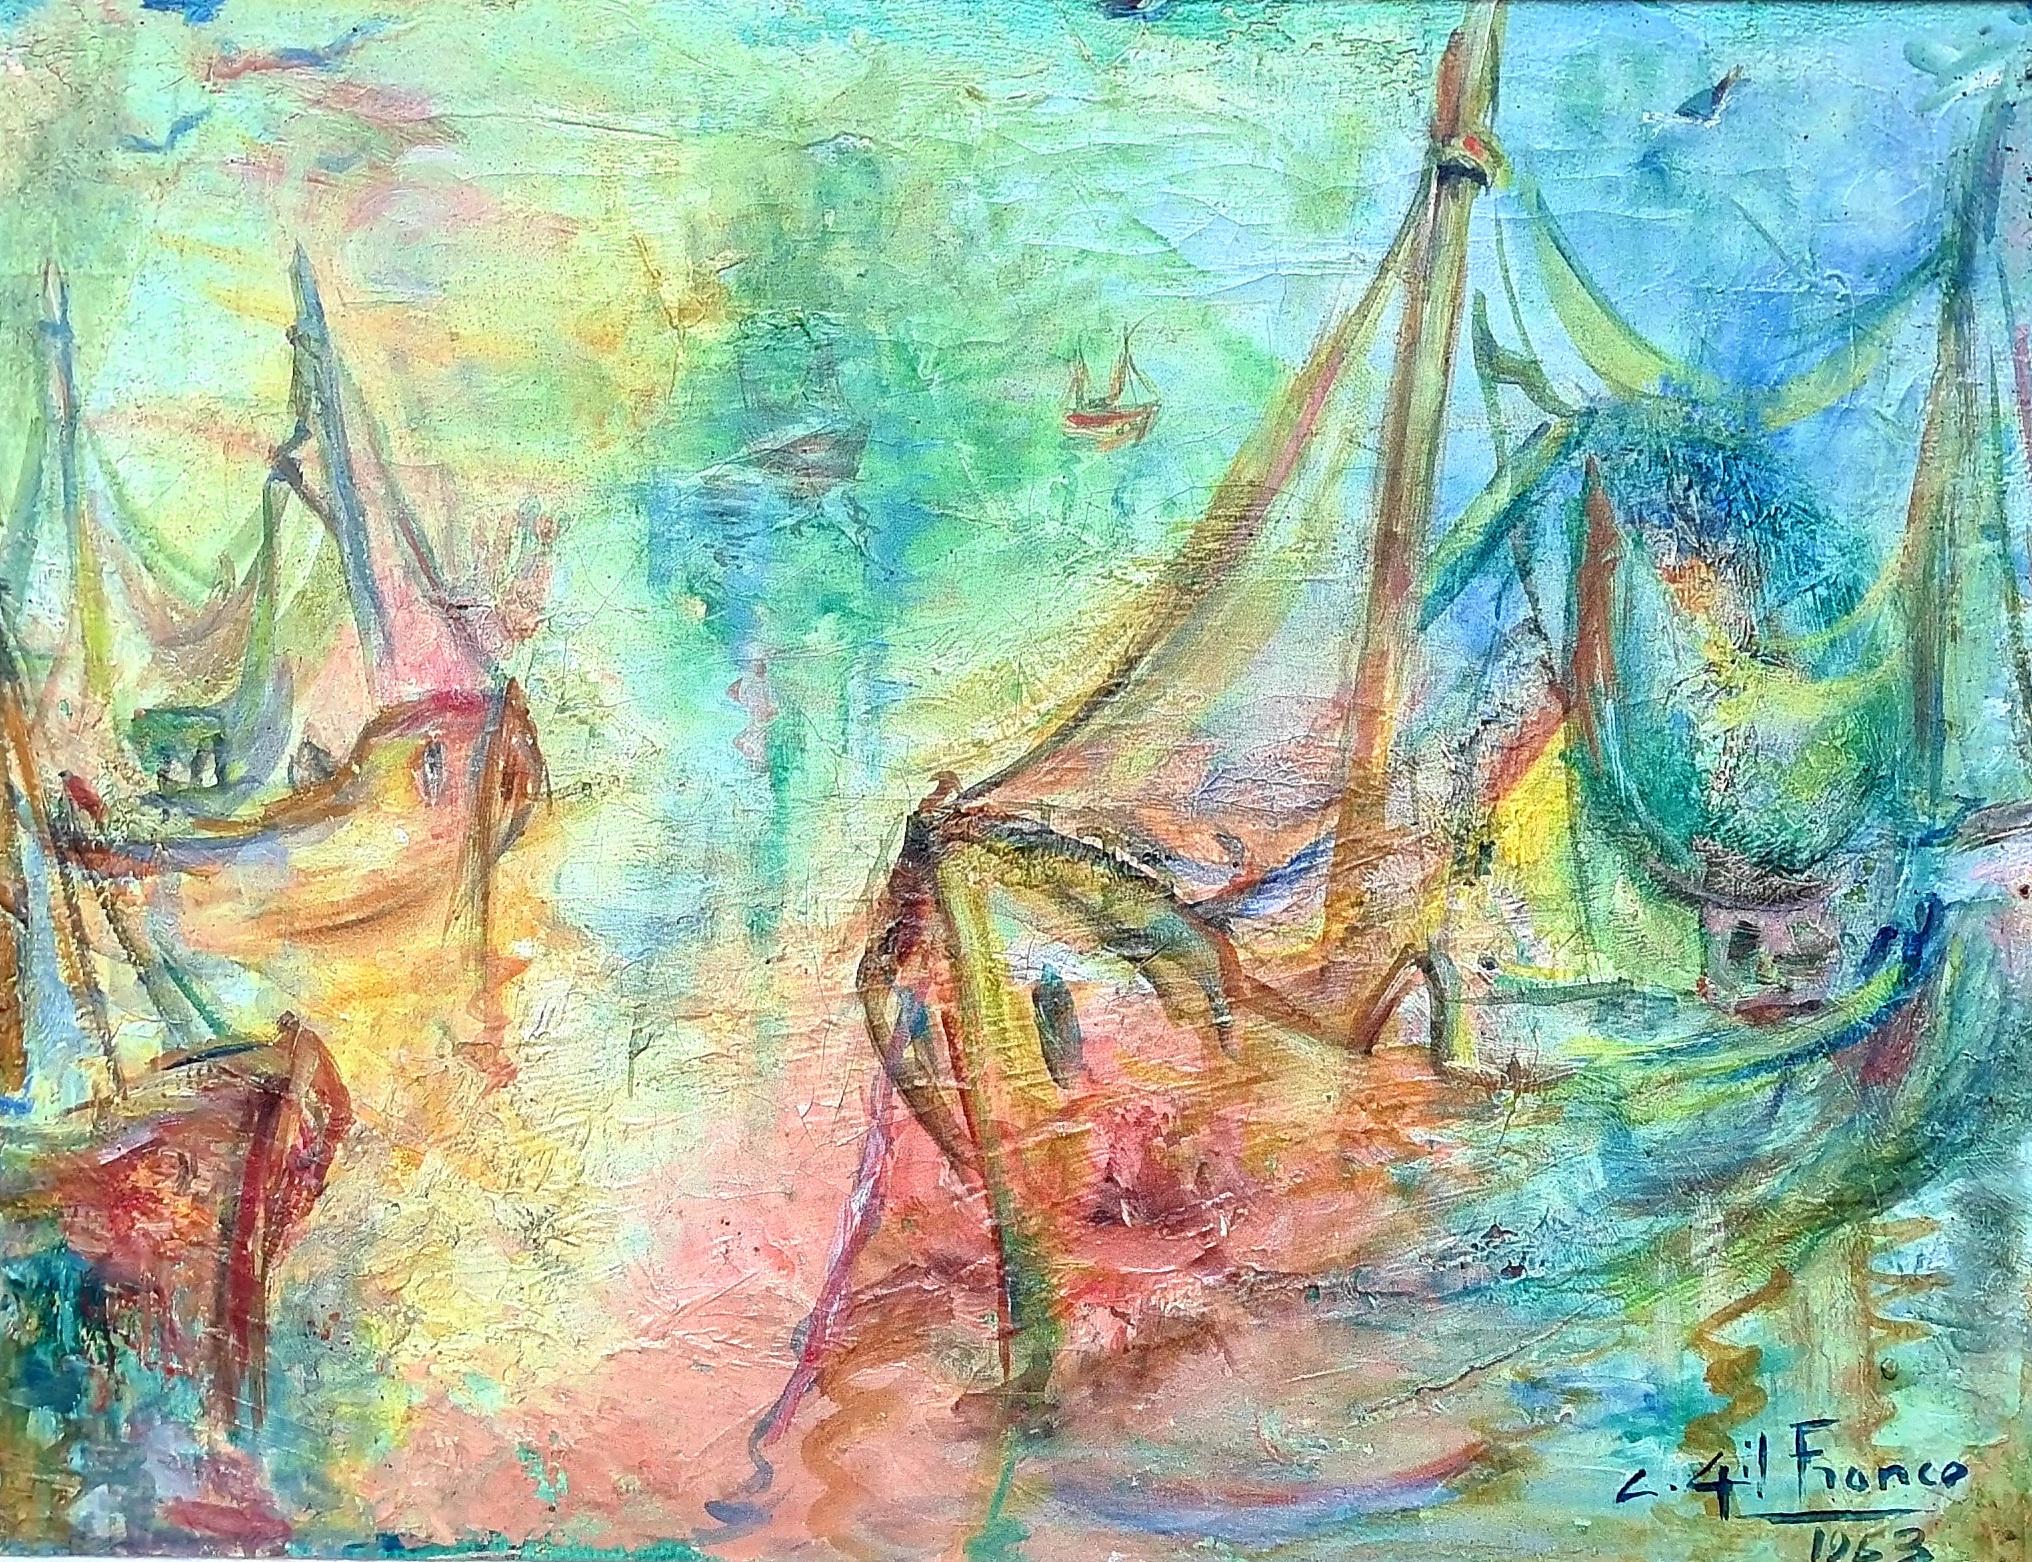 L 4il France Landscape Painting - Dream Boats, French Impressionist Oil on Canvas